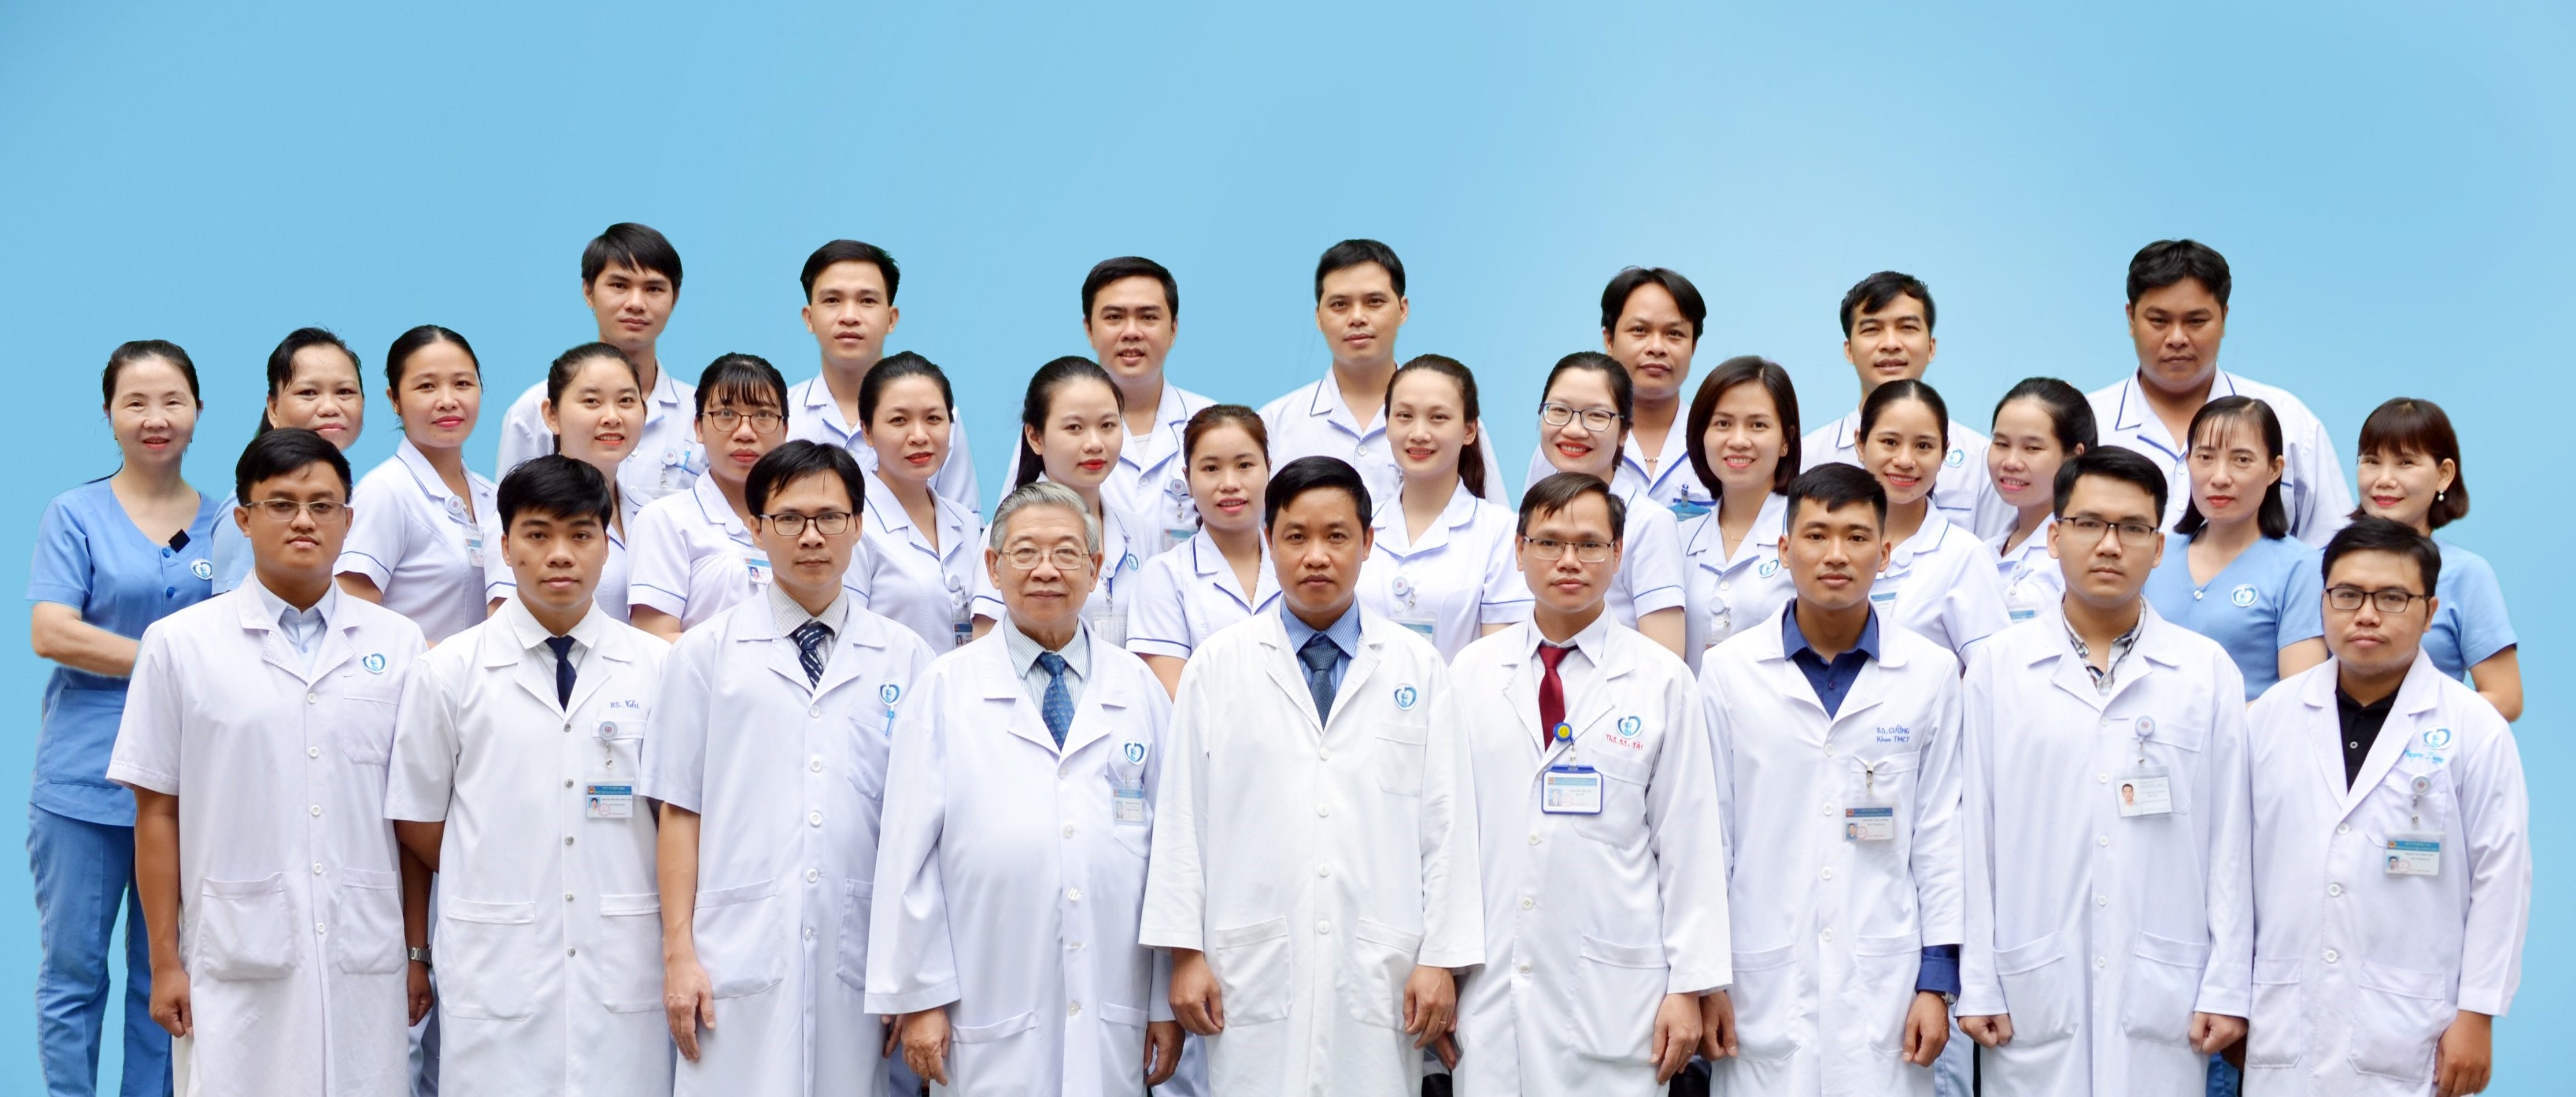 Khoa Tim Mạch Can Thiệp (Department Of Interventional Cardiology)